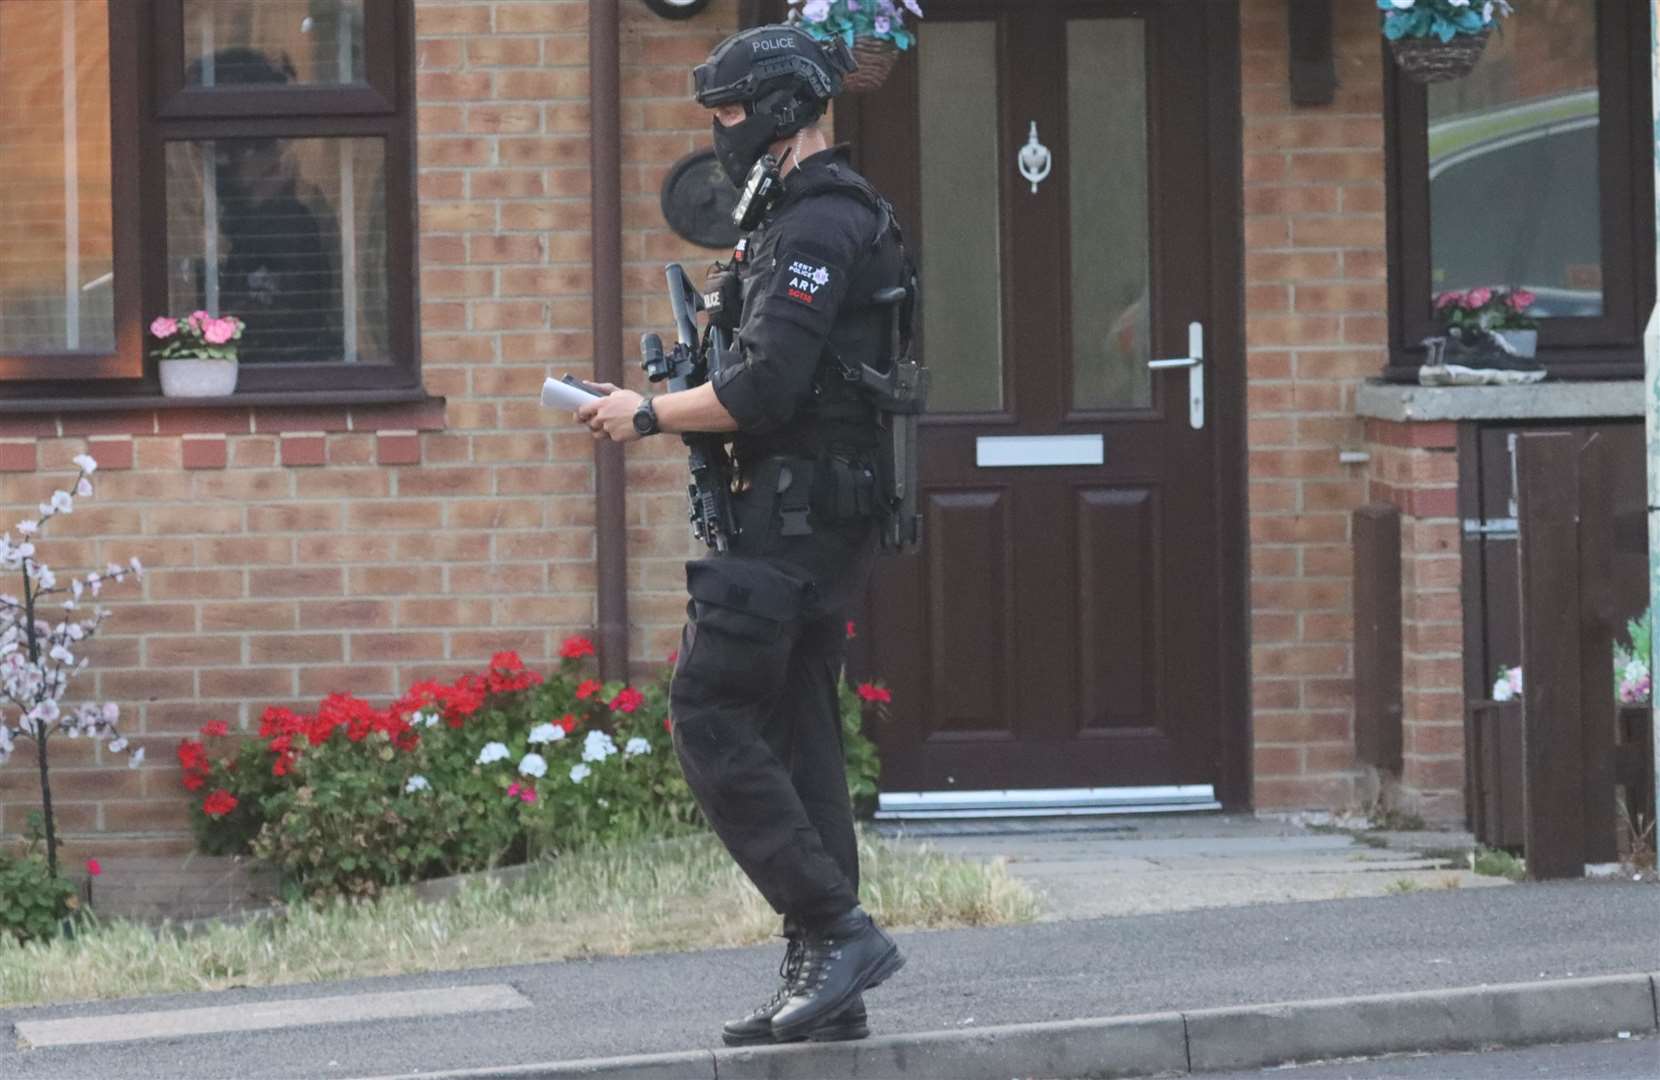 Armed police were spotted in Downsway, Charing, on Sunday evening. Picture: Ale Pen